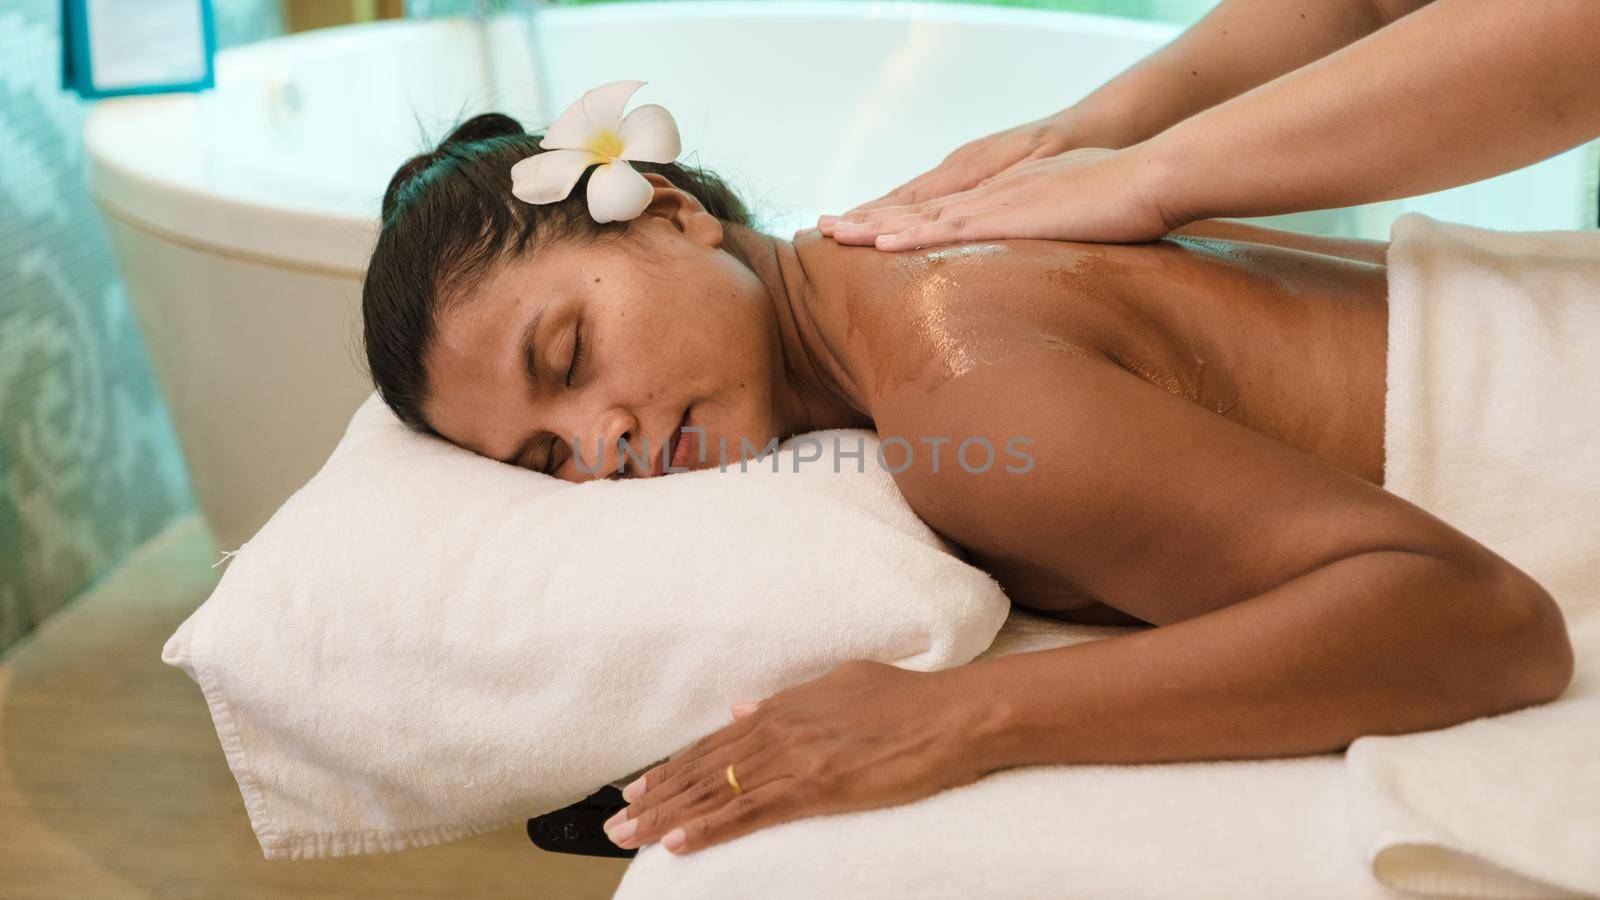 Asian women on a massage table, Asian women getting a Thai massage at a luxury hotel in Thailand.